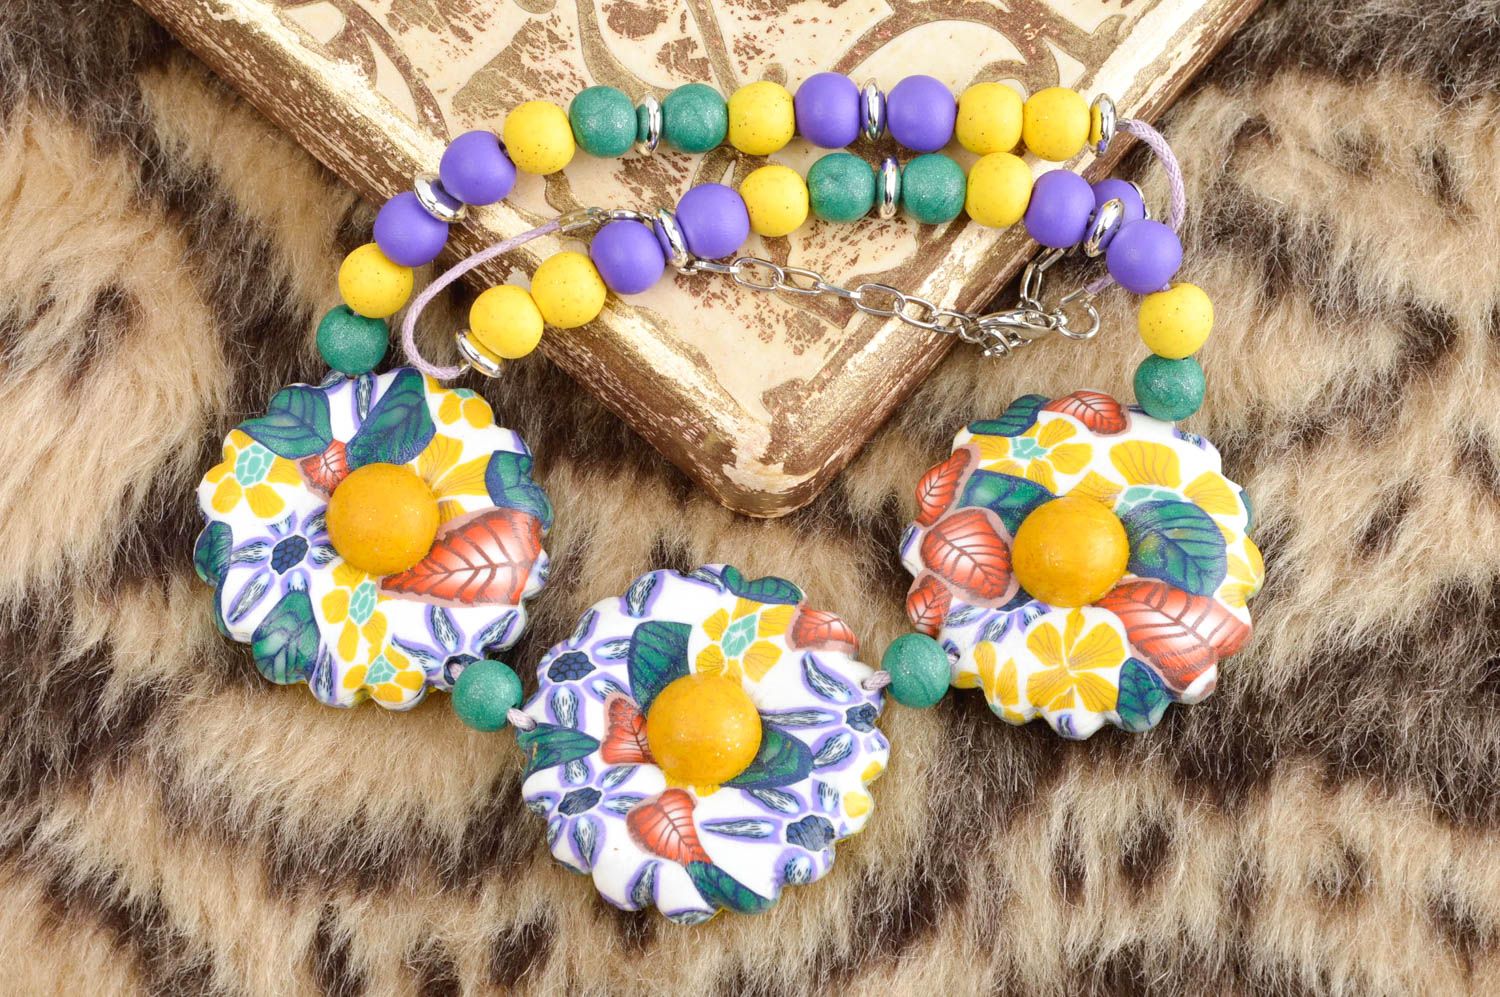 Stylish handmade necklace designs polymer clay ideas plastic necklace gift ideas photo 2